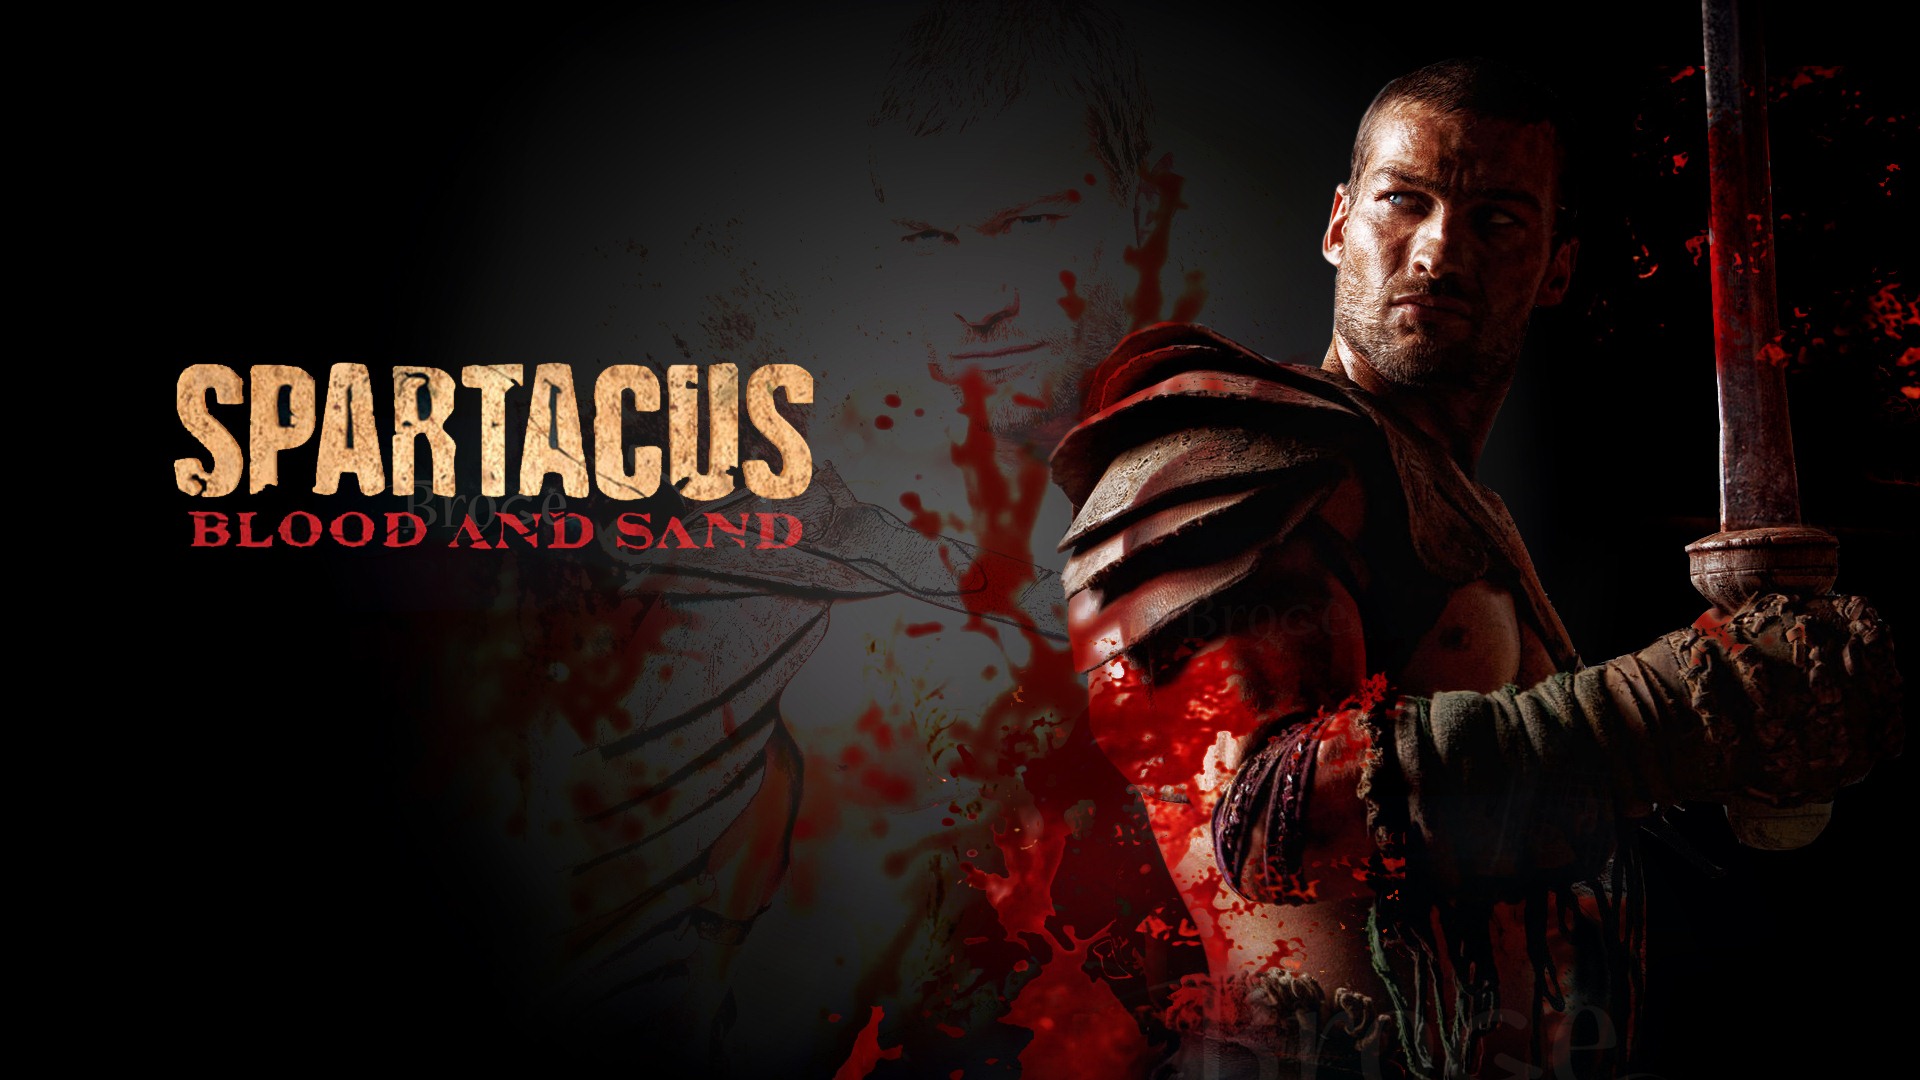 Spartacus: Blood and Sand HD wallpapers #13 - 1920x1080